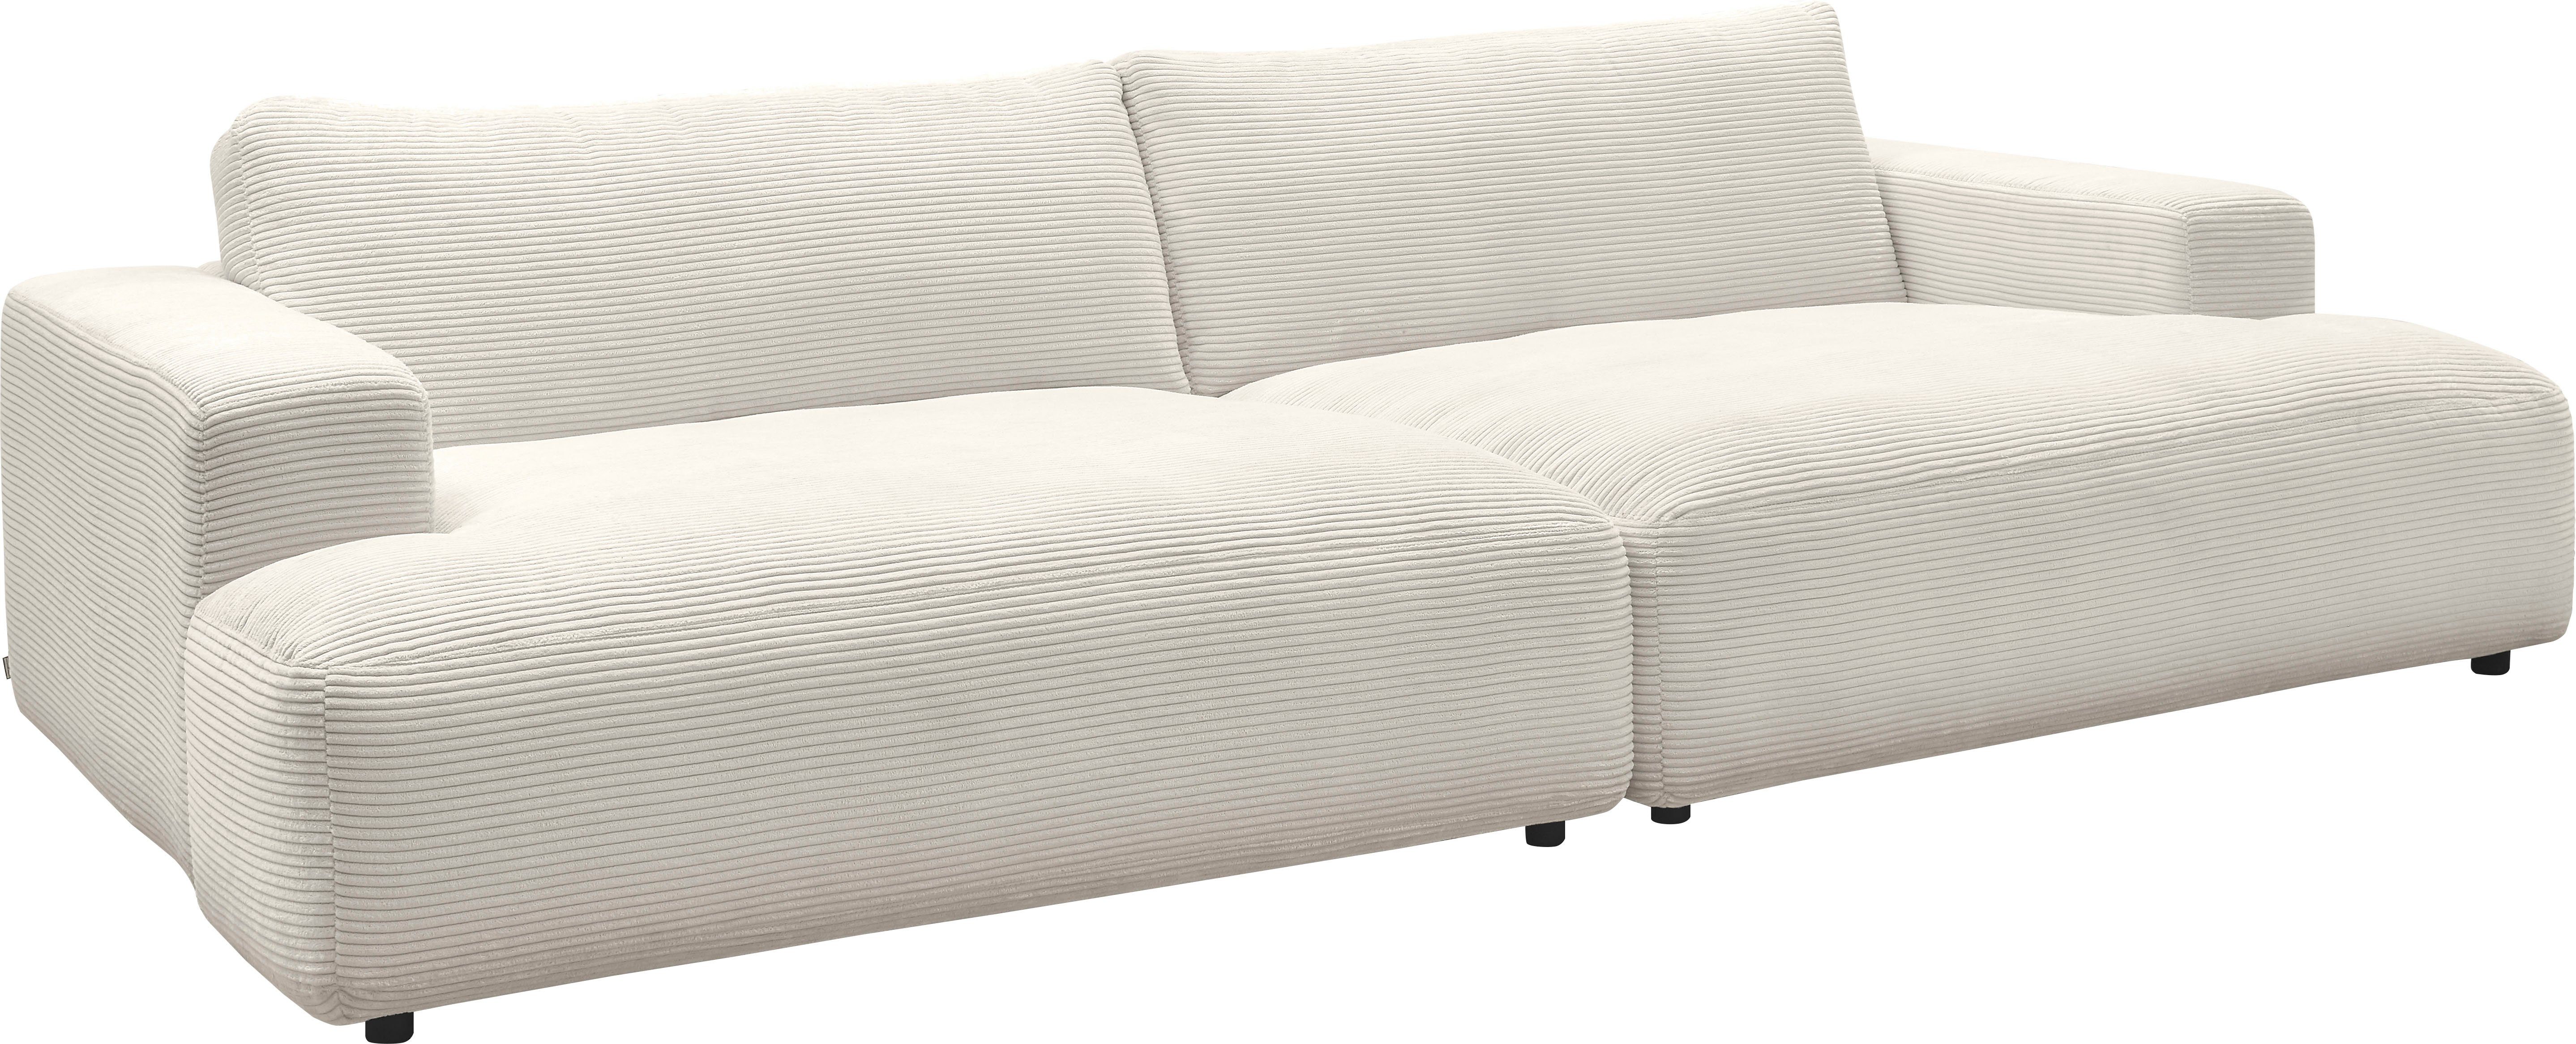 Loungesofa GALLERY 292 Lucia, cm Musterring M snow Cord-Bezug, by Breite branded